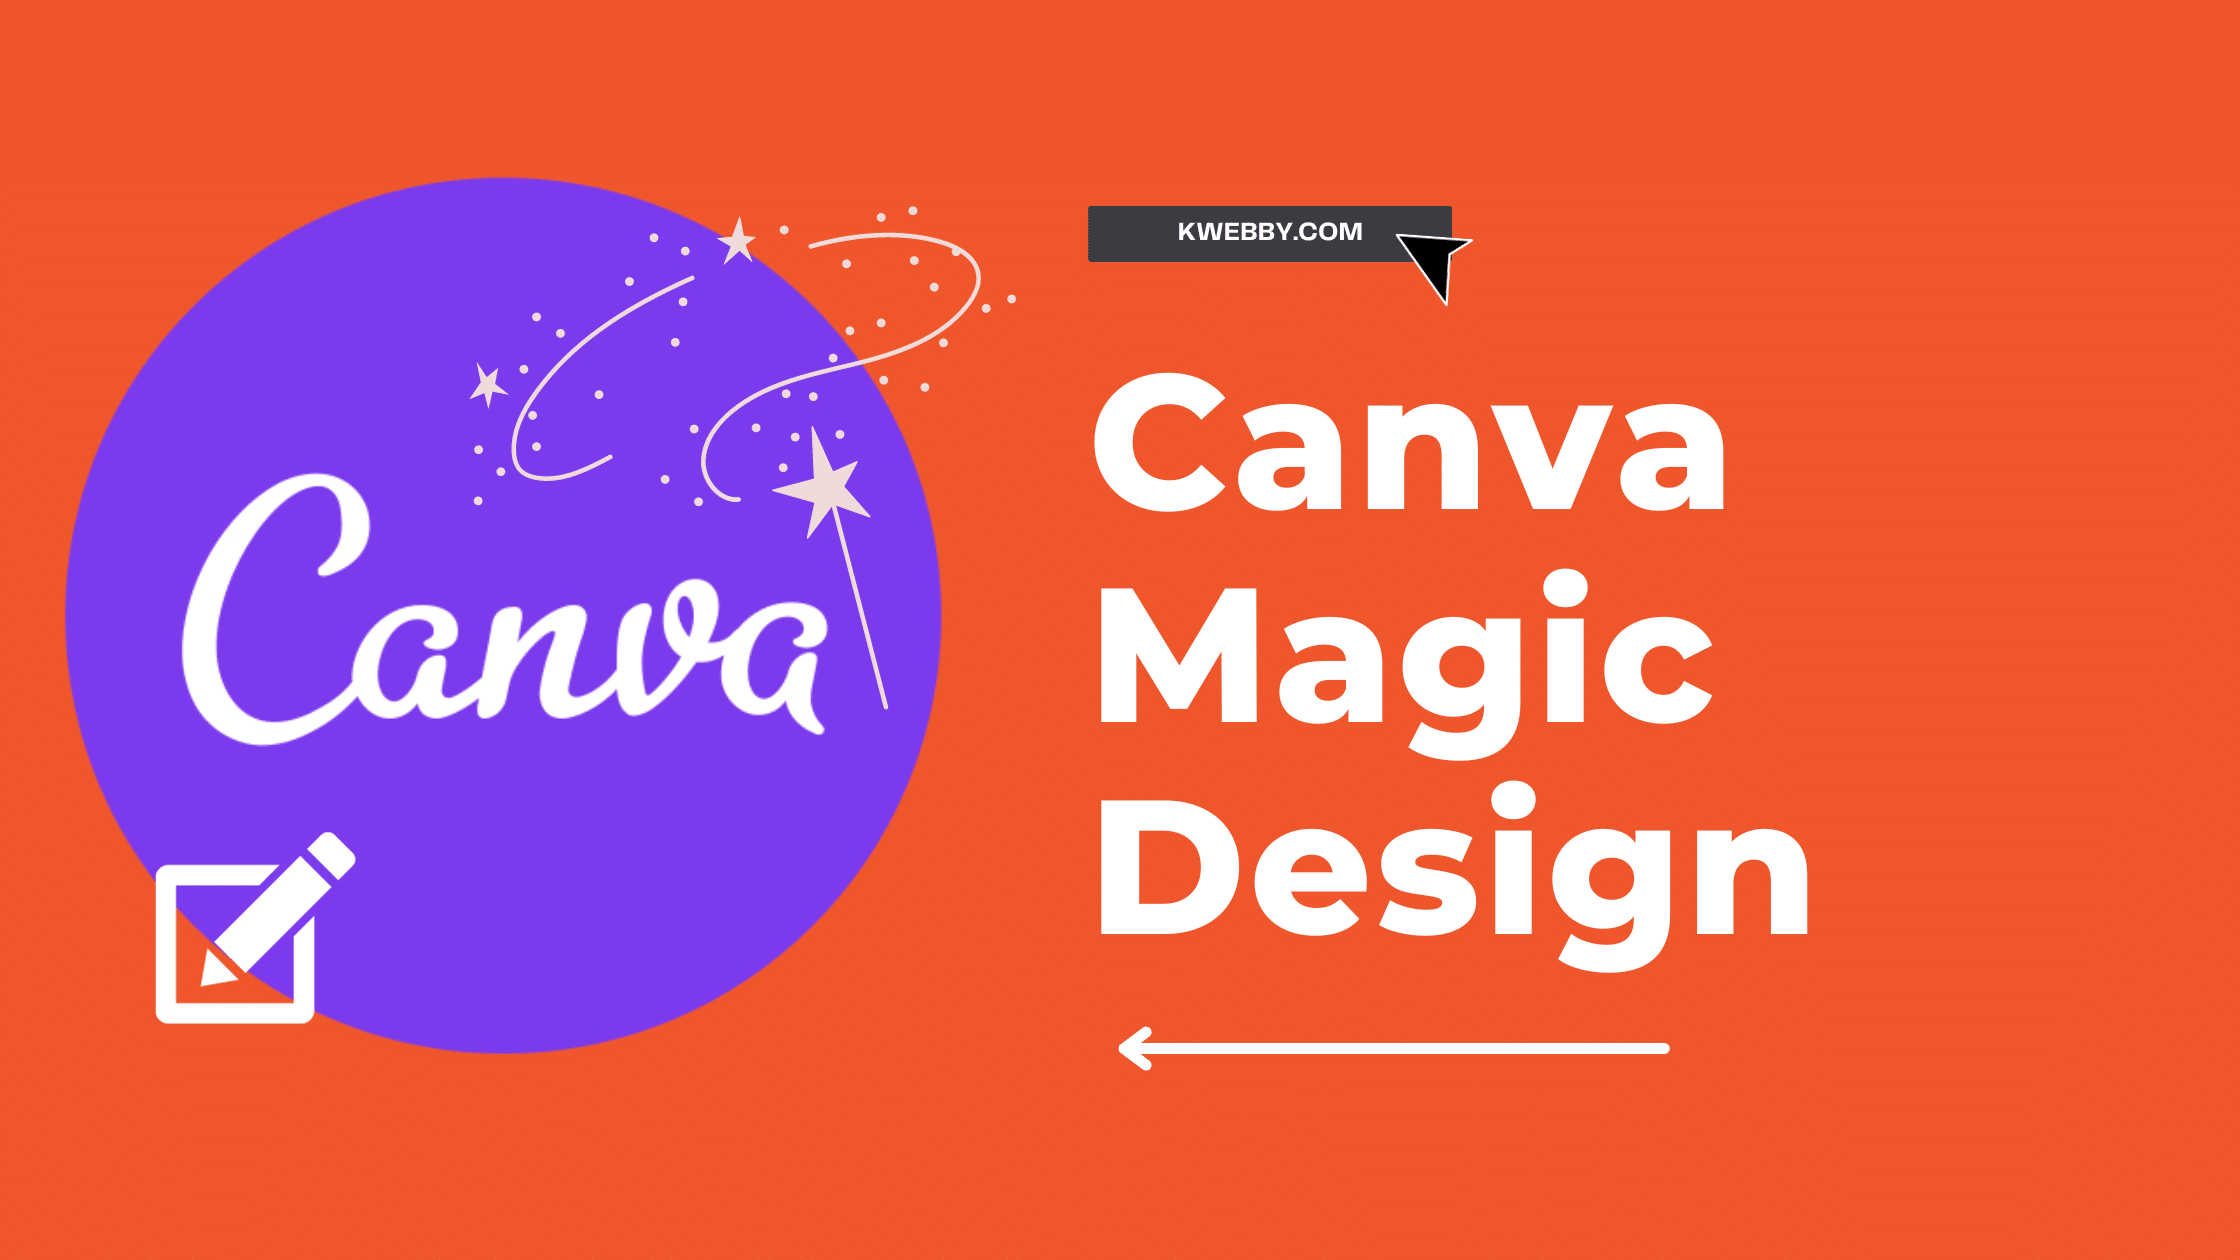 How to use Canva Magic Design? (3 Powerful Methods)